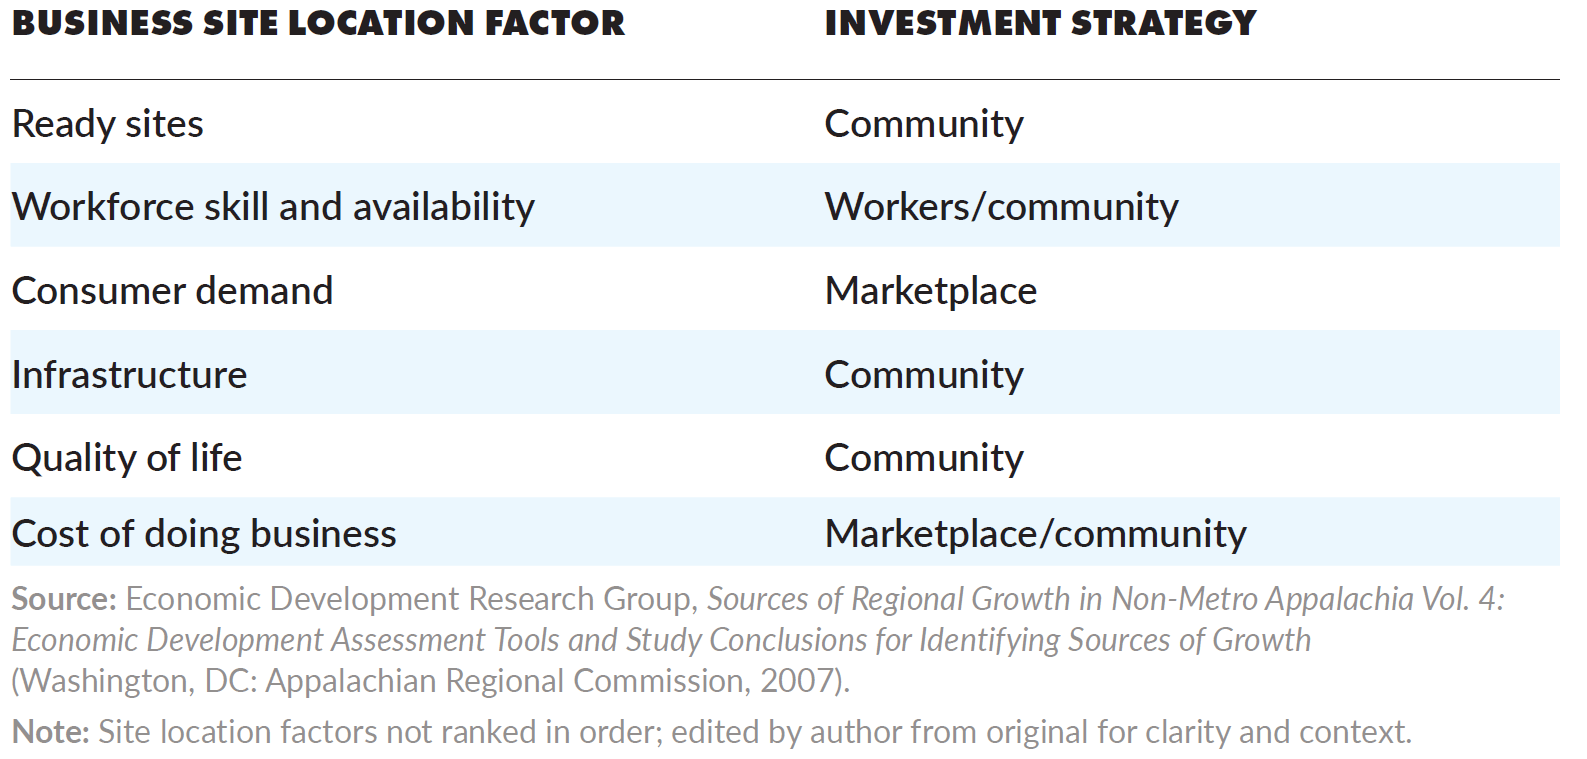 A table of business site location factors and their corresponding investment strategies. Ready sites require investment in the community. Workforce skill and availability require investment in workers and the community. Consumer demand requires investment in the marketplace. Infrastructure requires investment in the community. Quality of life requires investment in the community. And the cost of doing business requires investment in the marketplace and the community.